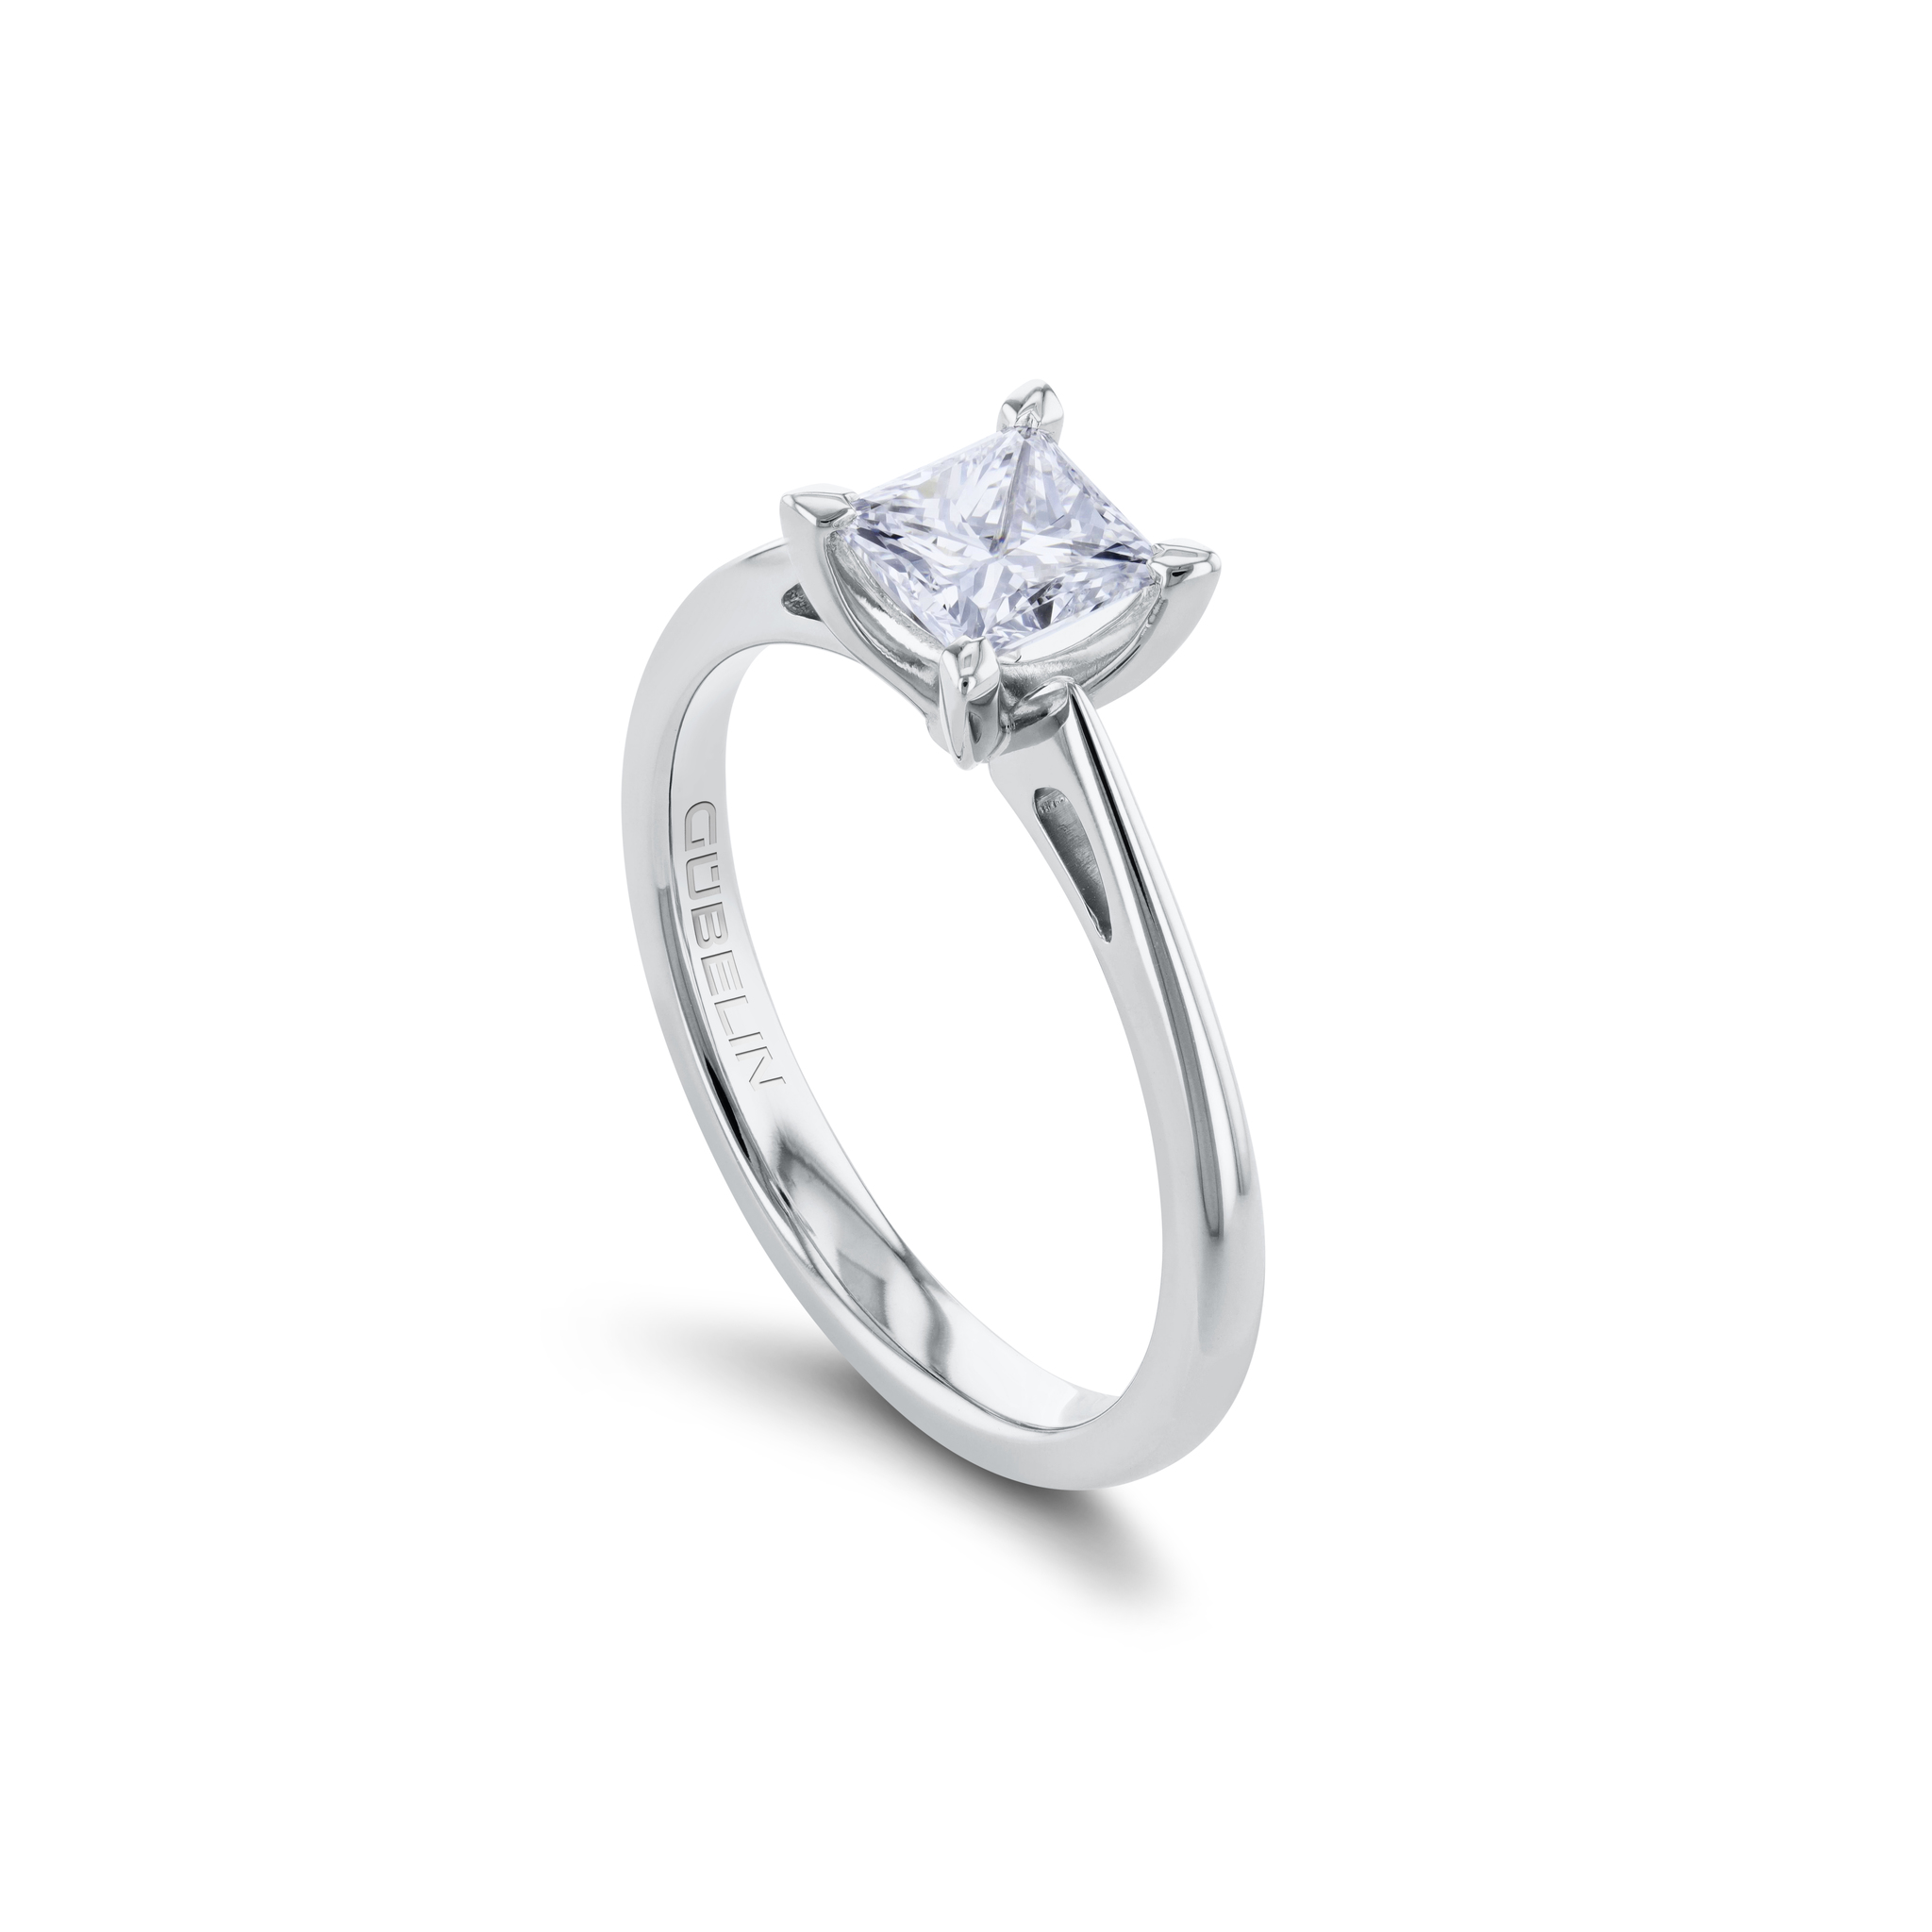 Solitaire ring with diamond